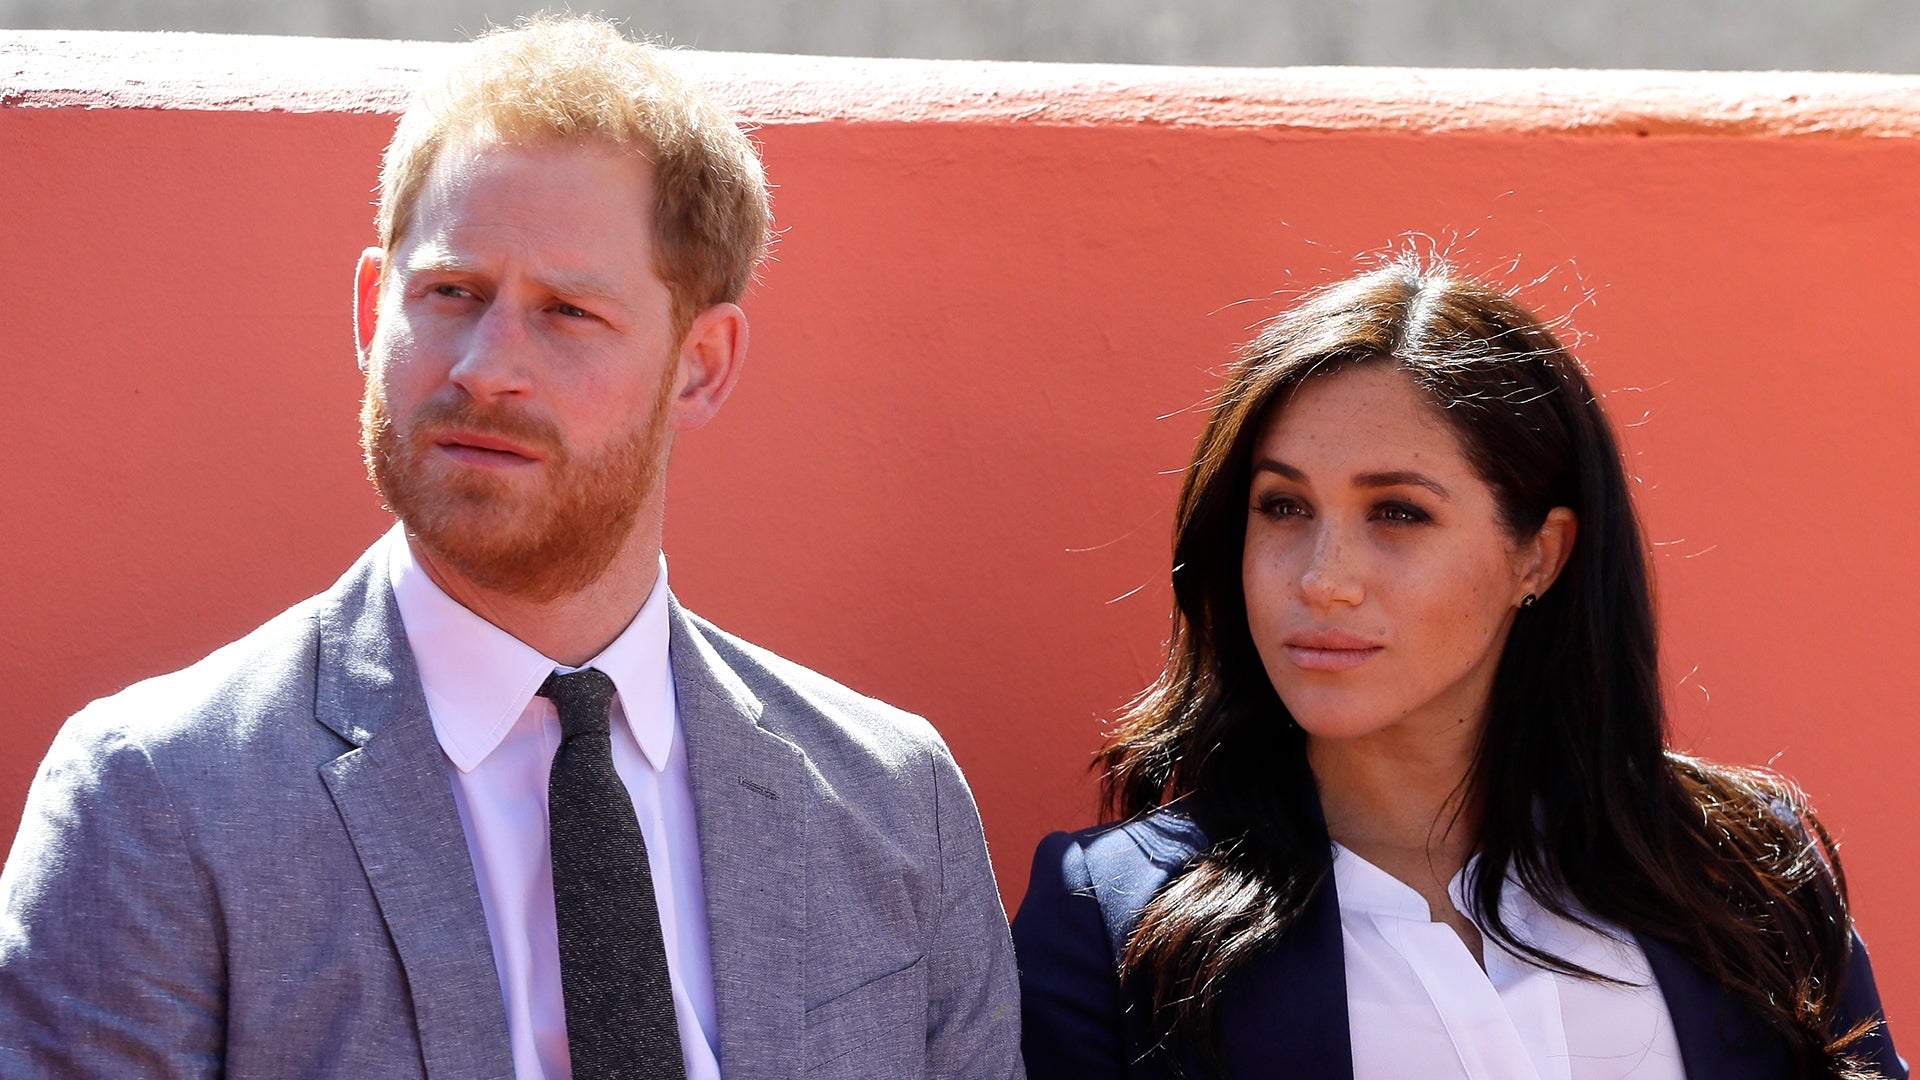 Meghan Markle Recently Wore a Personalized Ring for Daughter